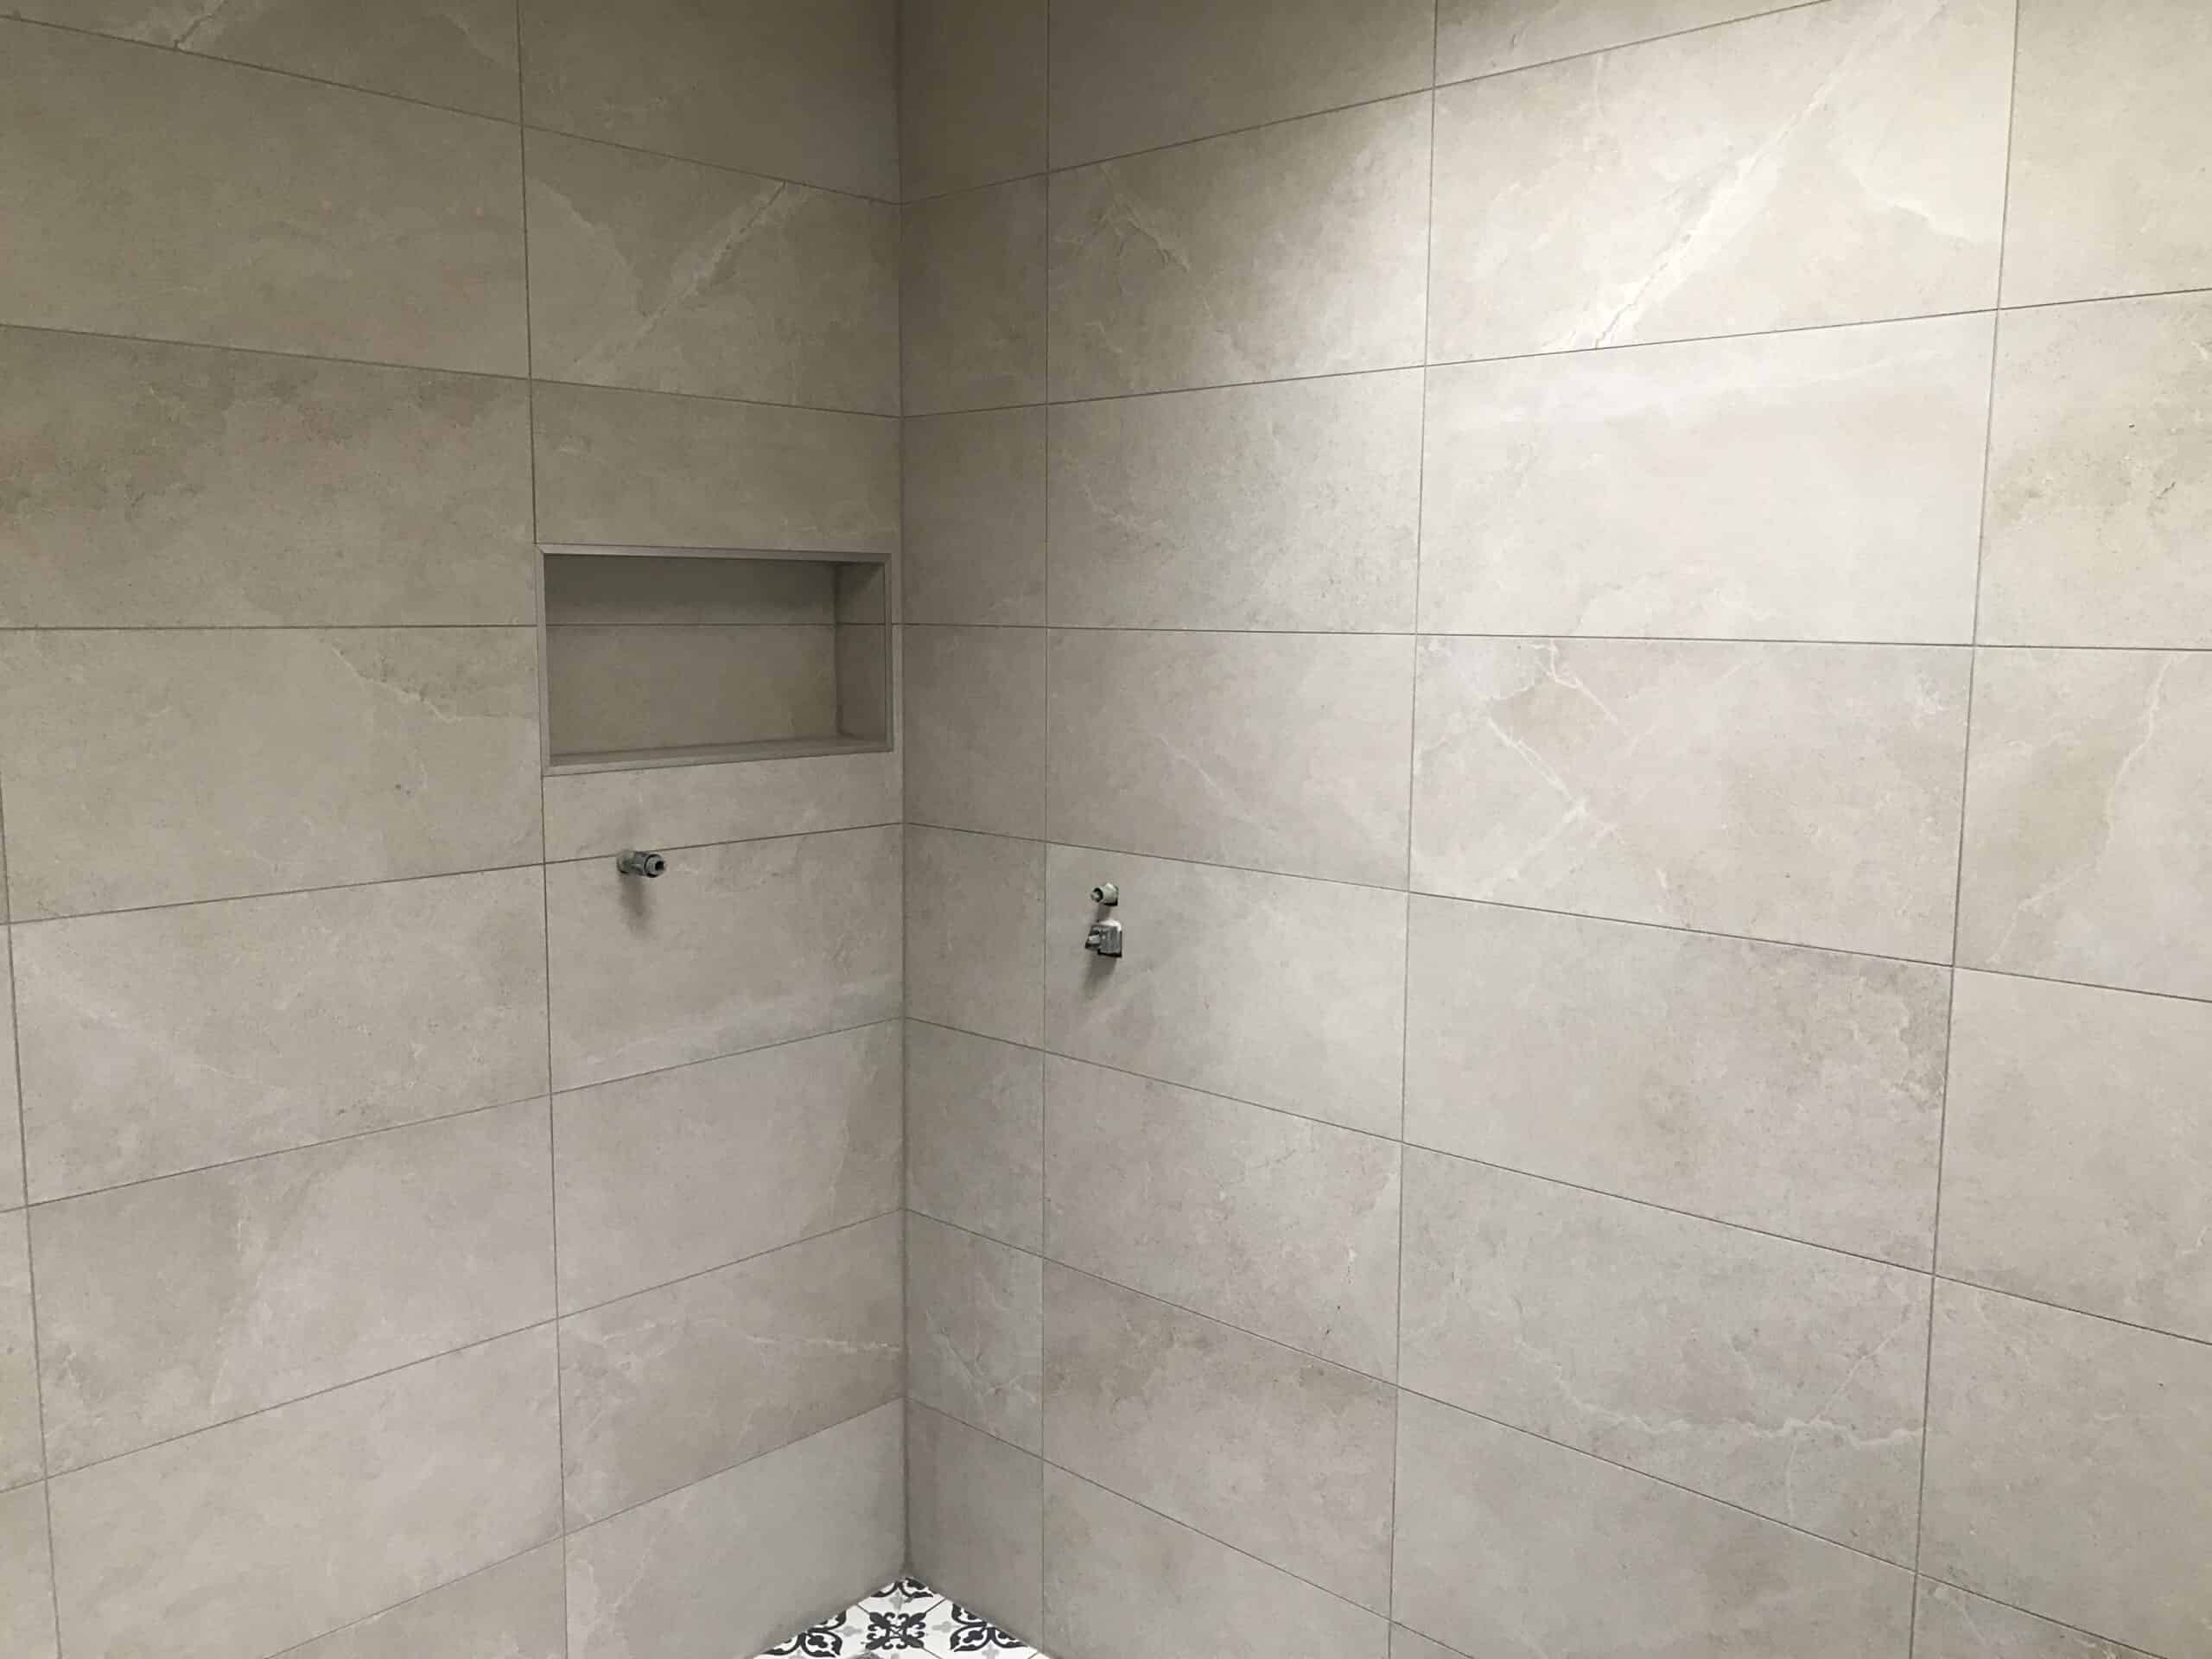 Shower tiles with grey grout